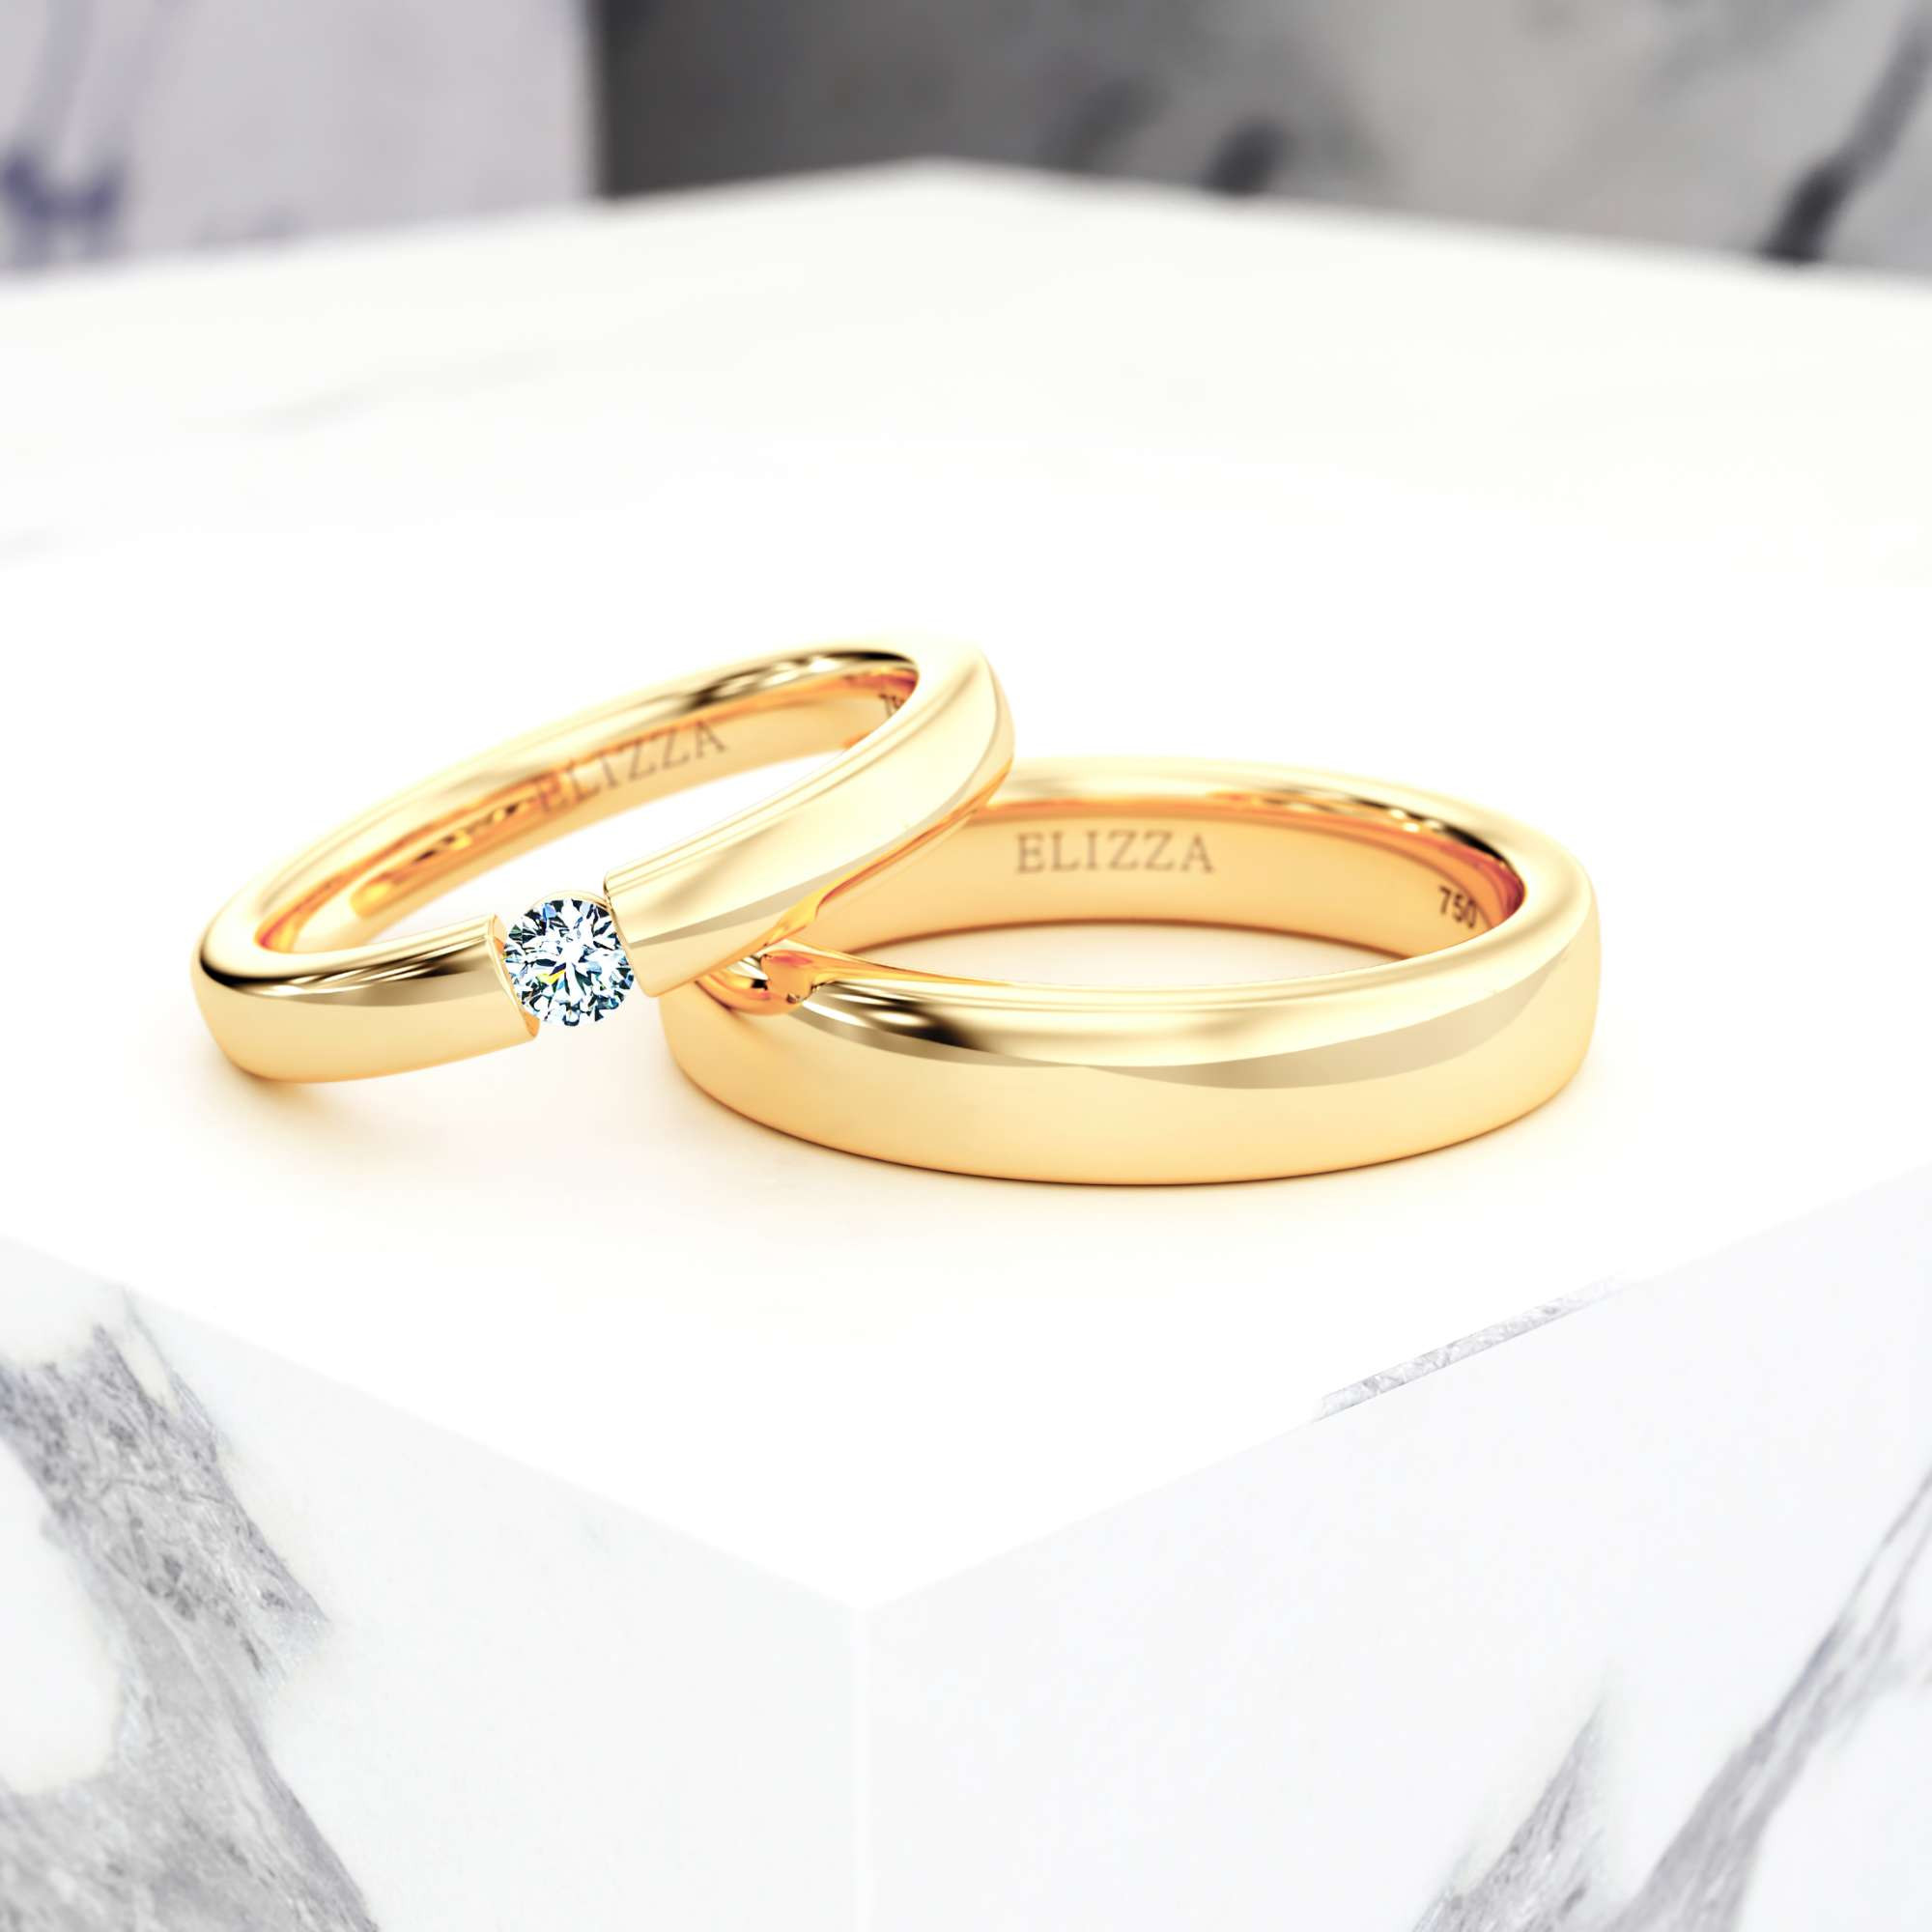 Trauring Eicca Couple | 14K Gelbgold 1